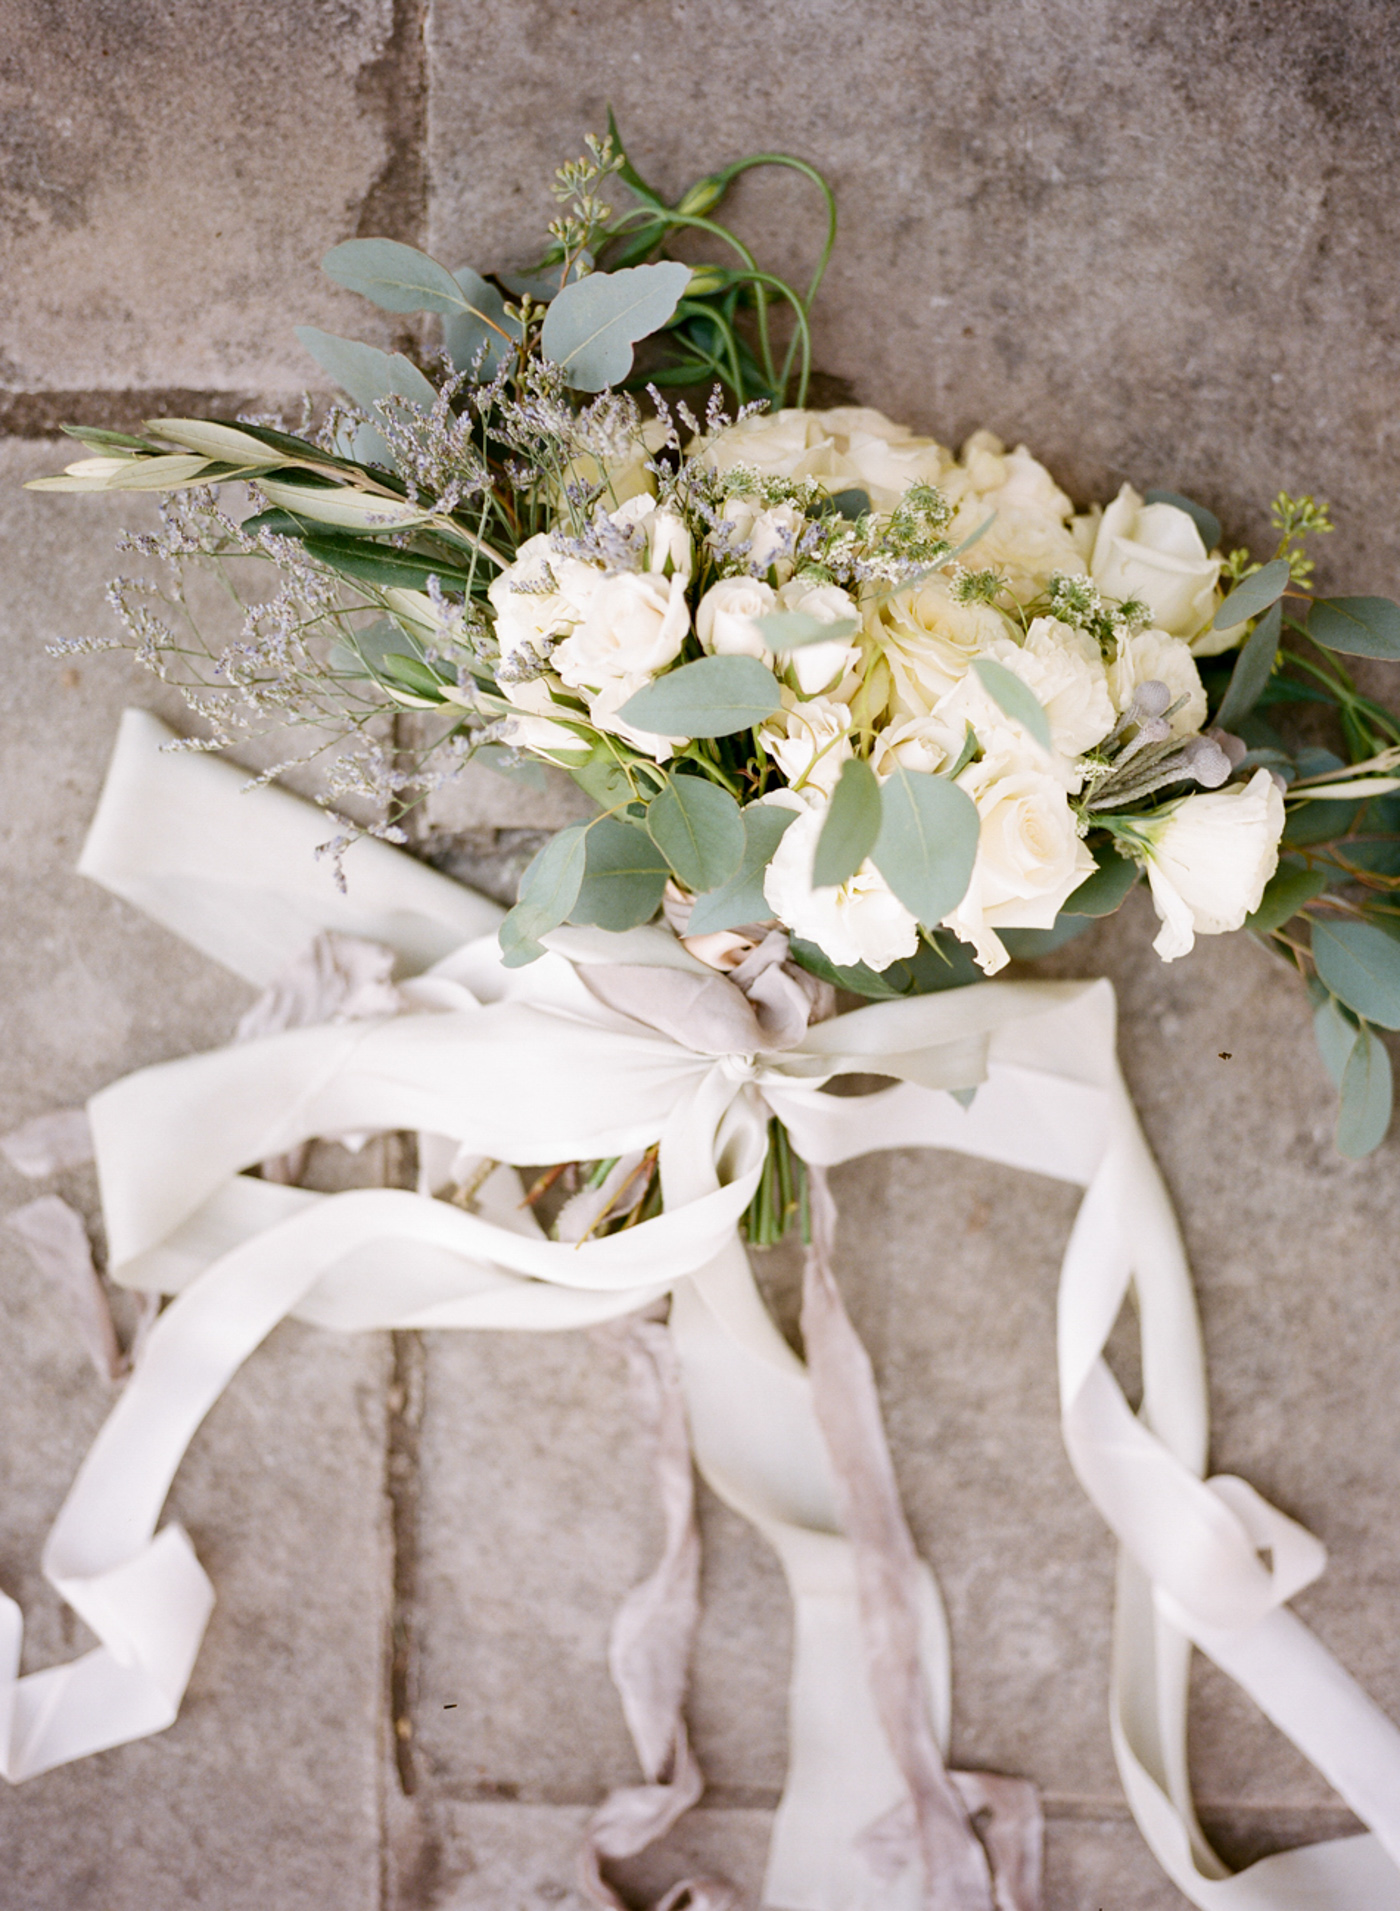 Silk & Willow ribbons,
Koby Brown Photography,
Nashville Tennessee Wedding Photographer,
Rachel and Johnny